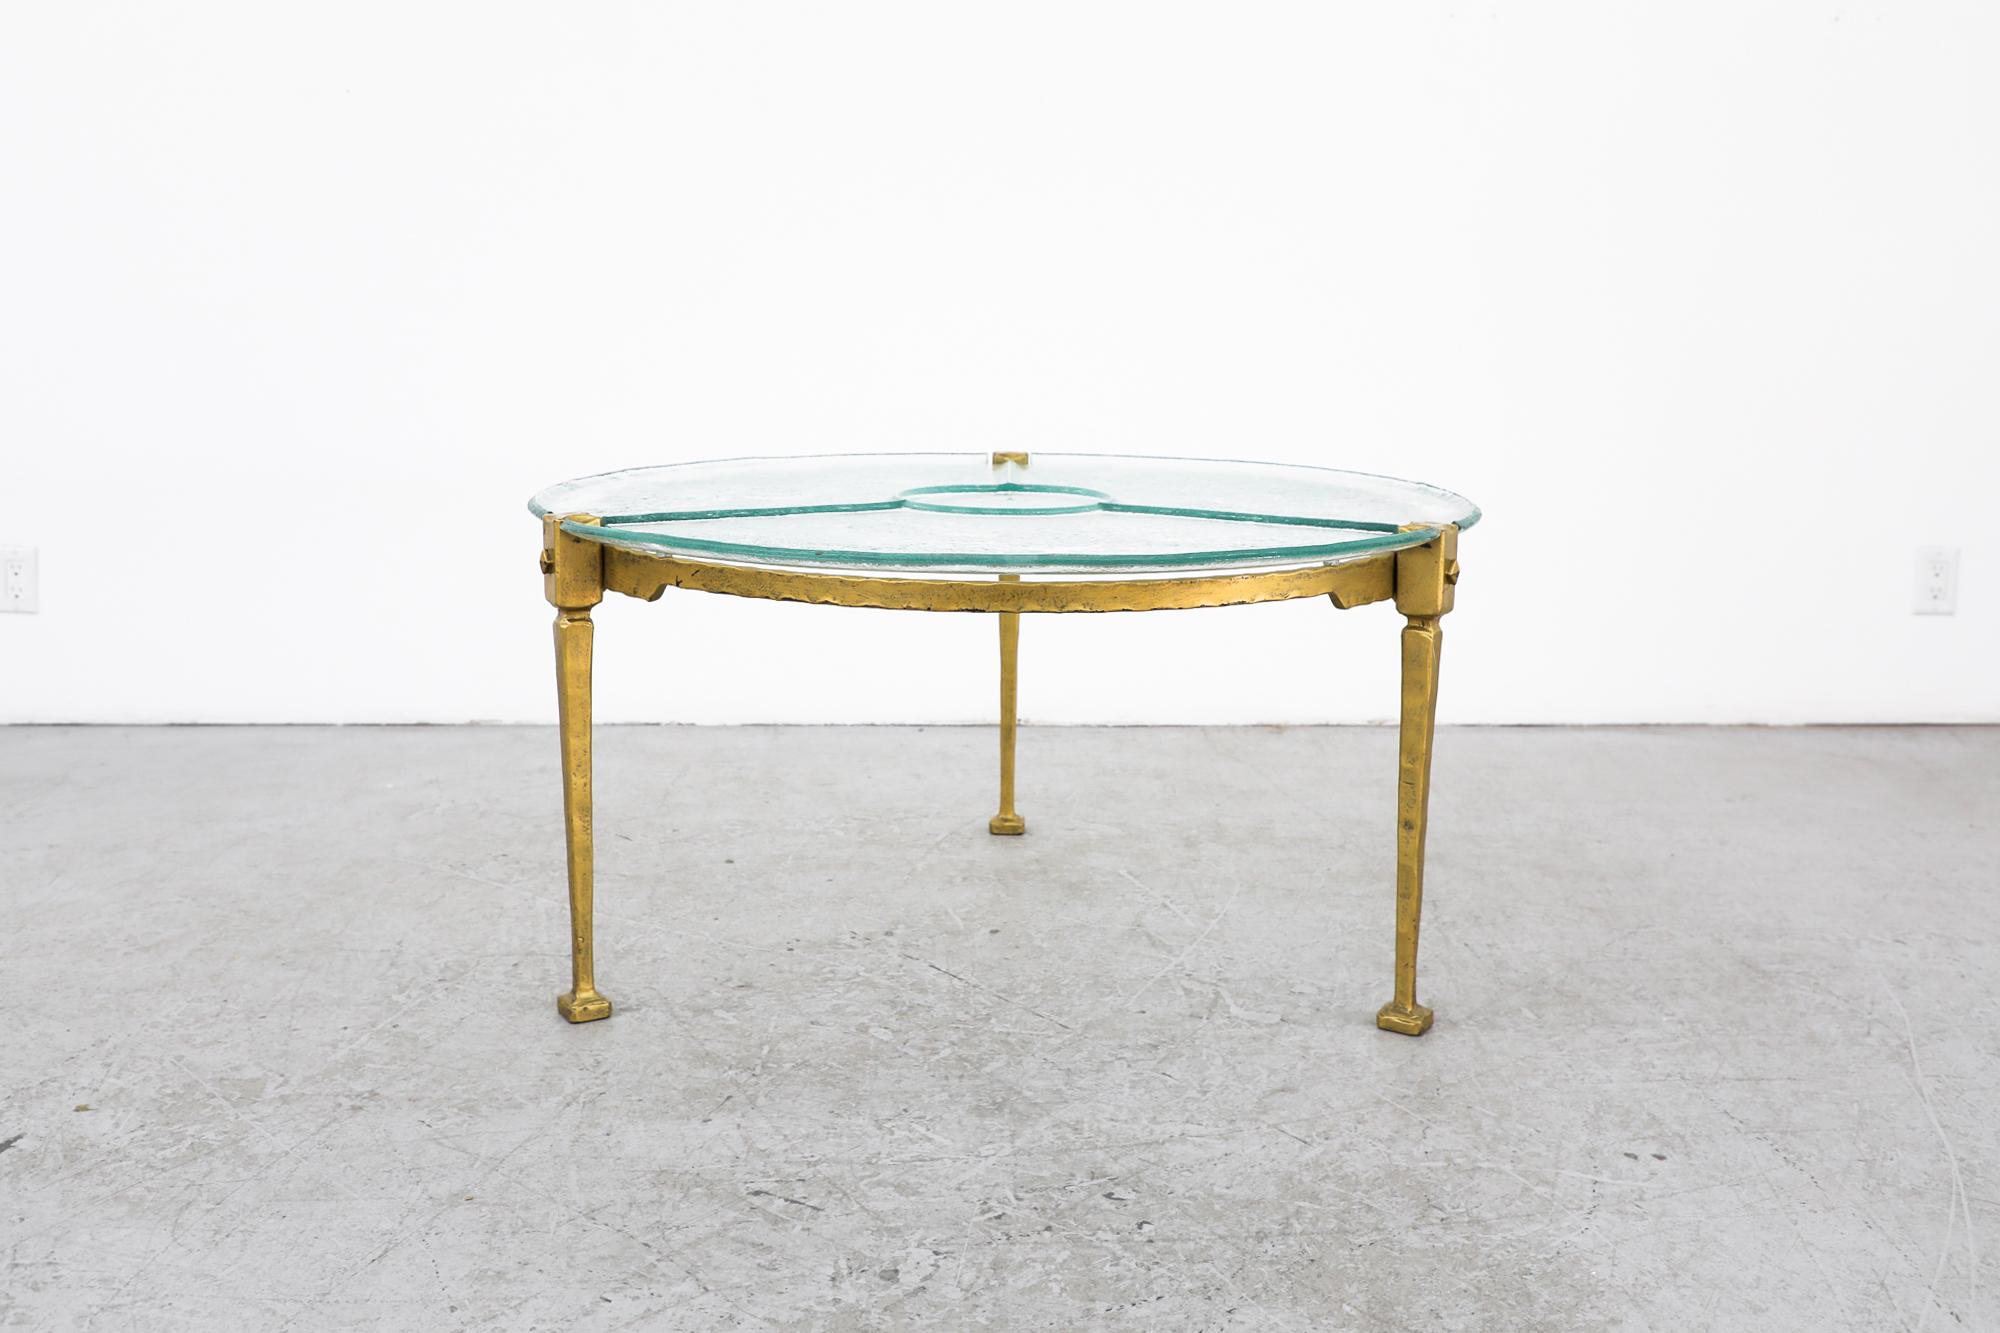 Stunning Brutalist round enameled coffee or side table with slumped textured glass top and gold enameled metal frame. Designed by German multi disciplined disgner and sculptor Lothar Klute (1946). In original condition with visible wear consistent